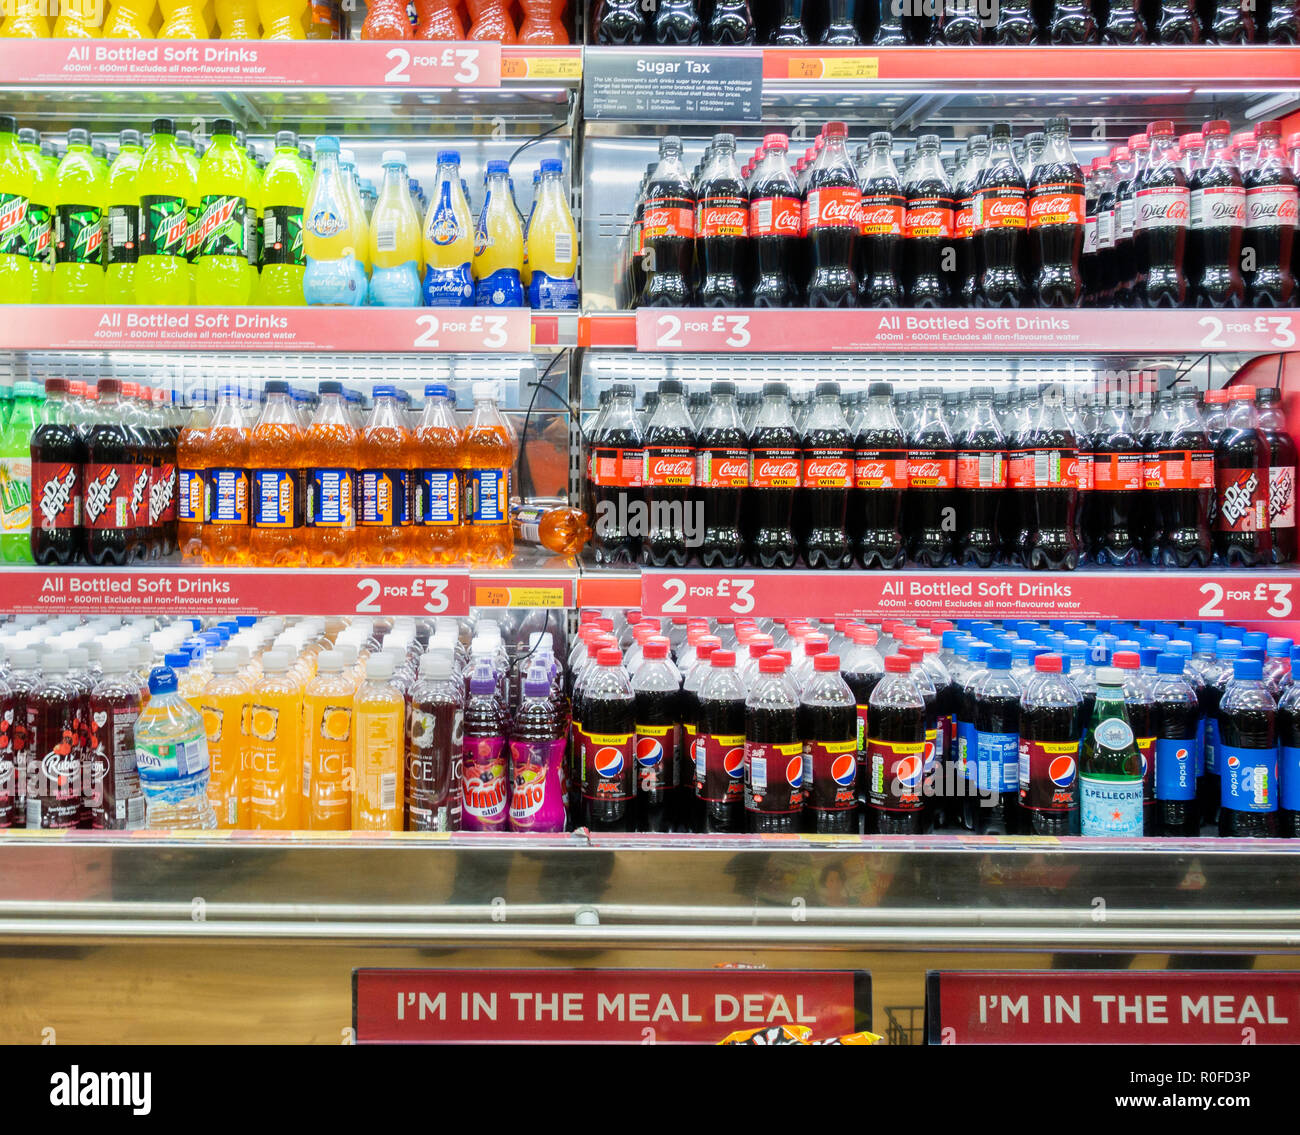 Anti obesity Sugar Tax surcharge on fizzy/sugary drinks in UK shop. Stock Photo